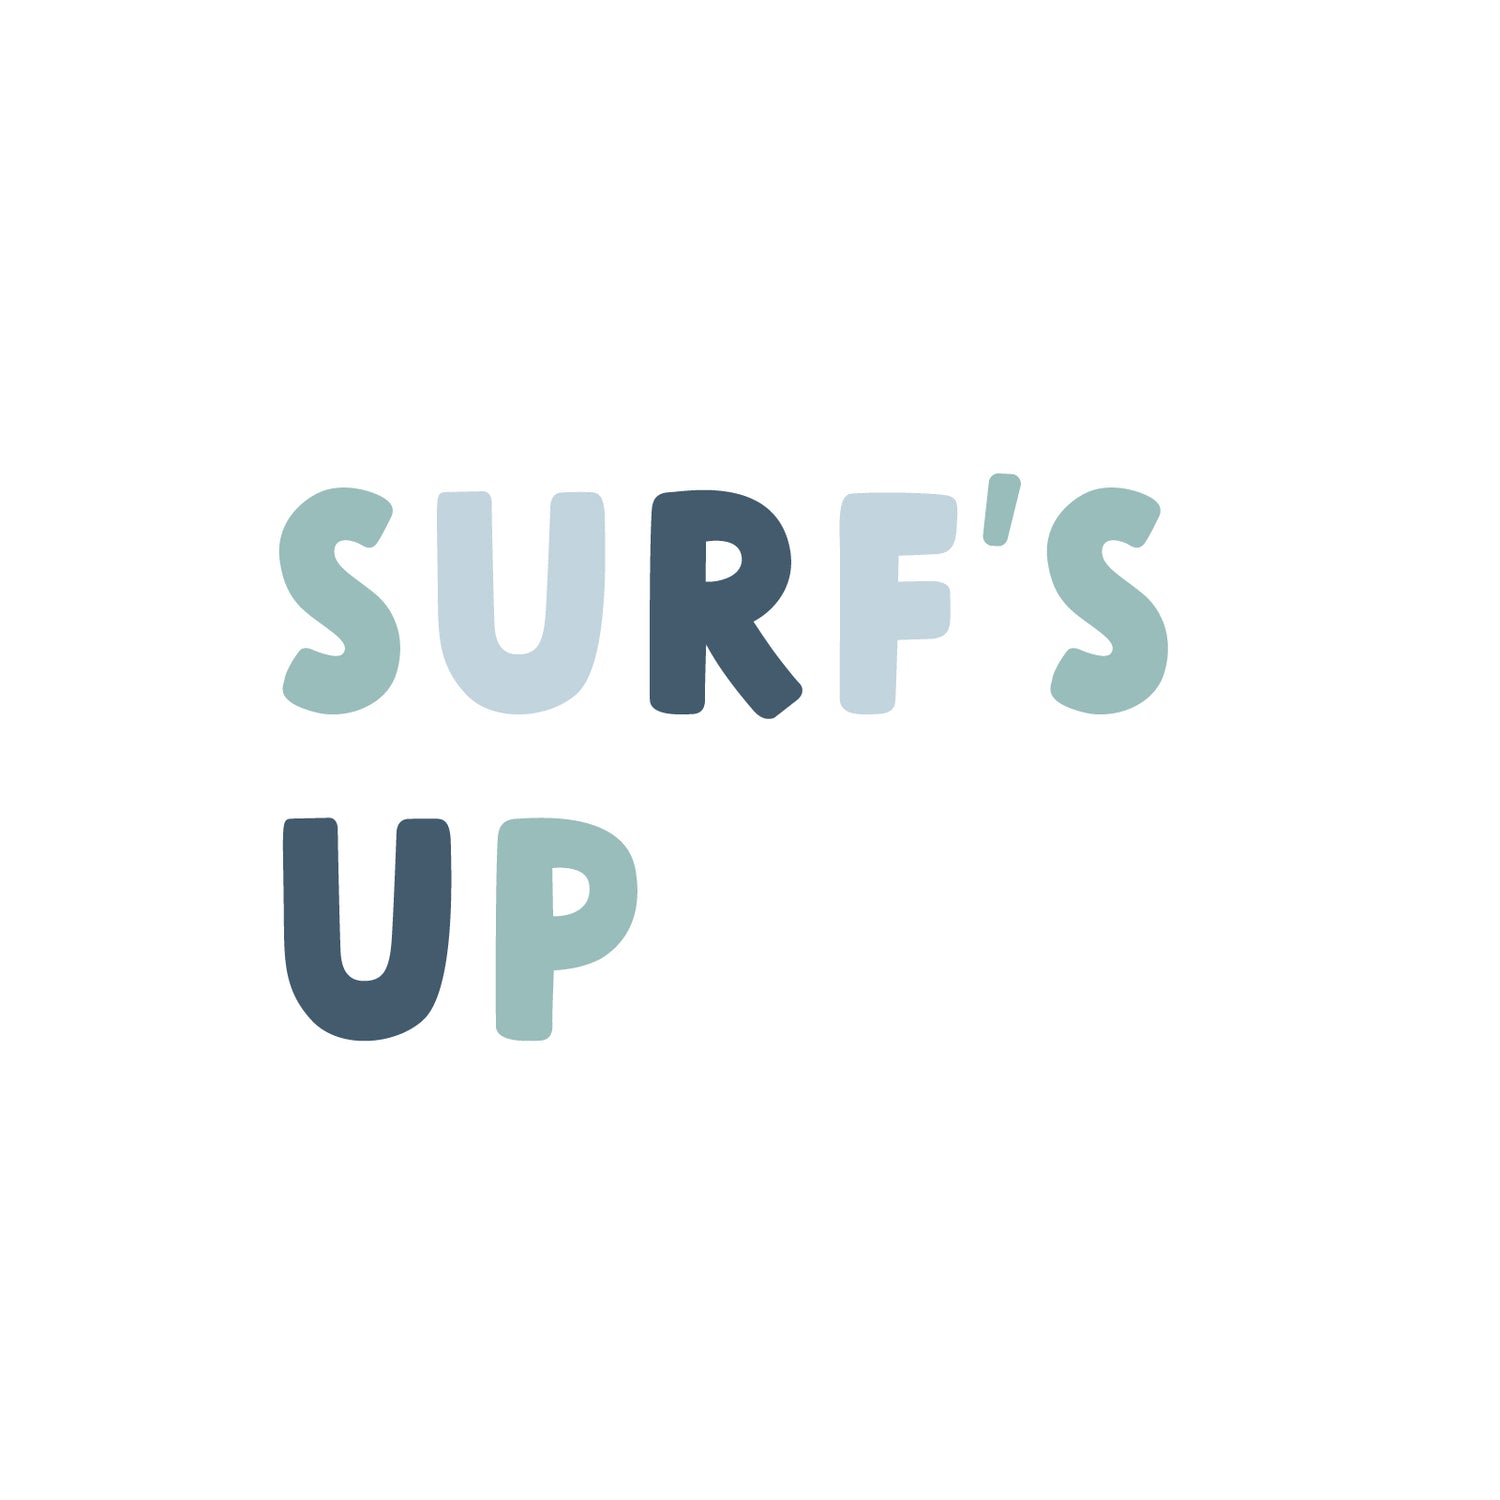 'Surf's Up' R U Wall Quote | Boys Room Girls Room | Surf Style | A Creative Hart Fabric Wall Decal - A Creative Hart